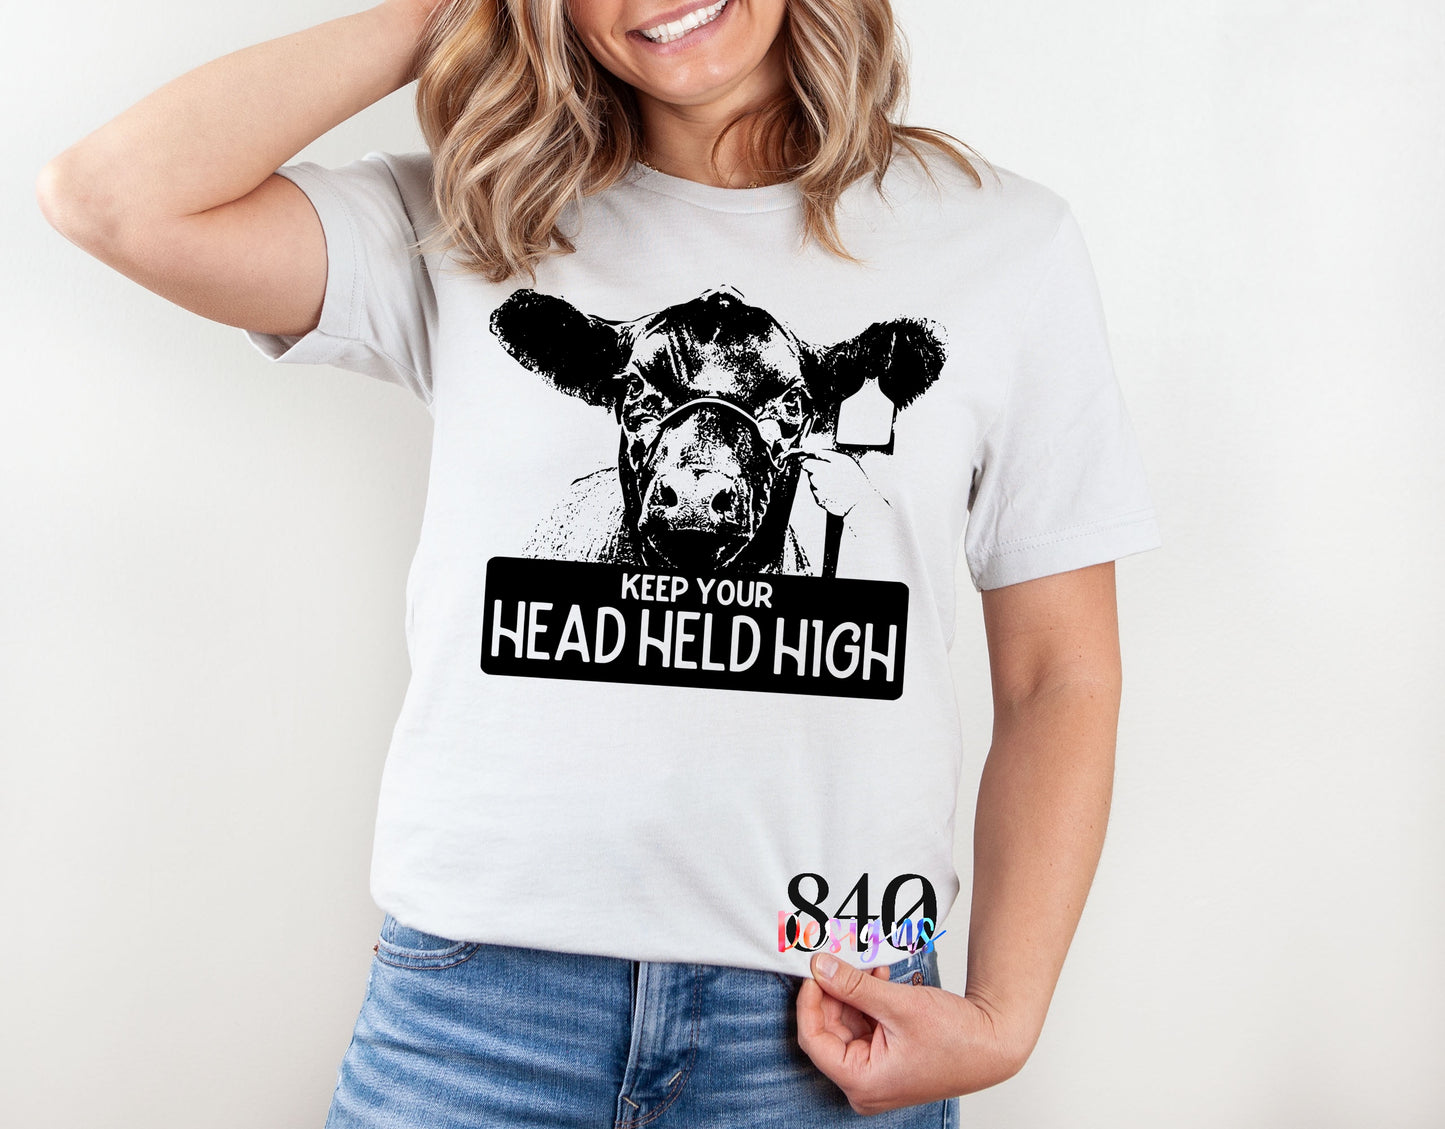 Keep Your Head Held High - 840 Exclusive